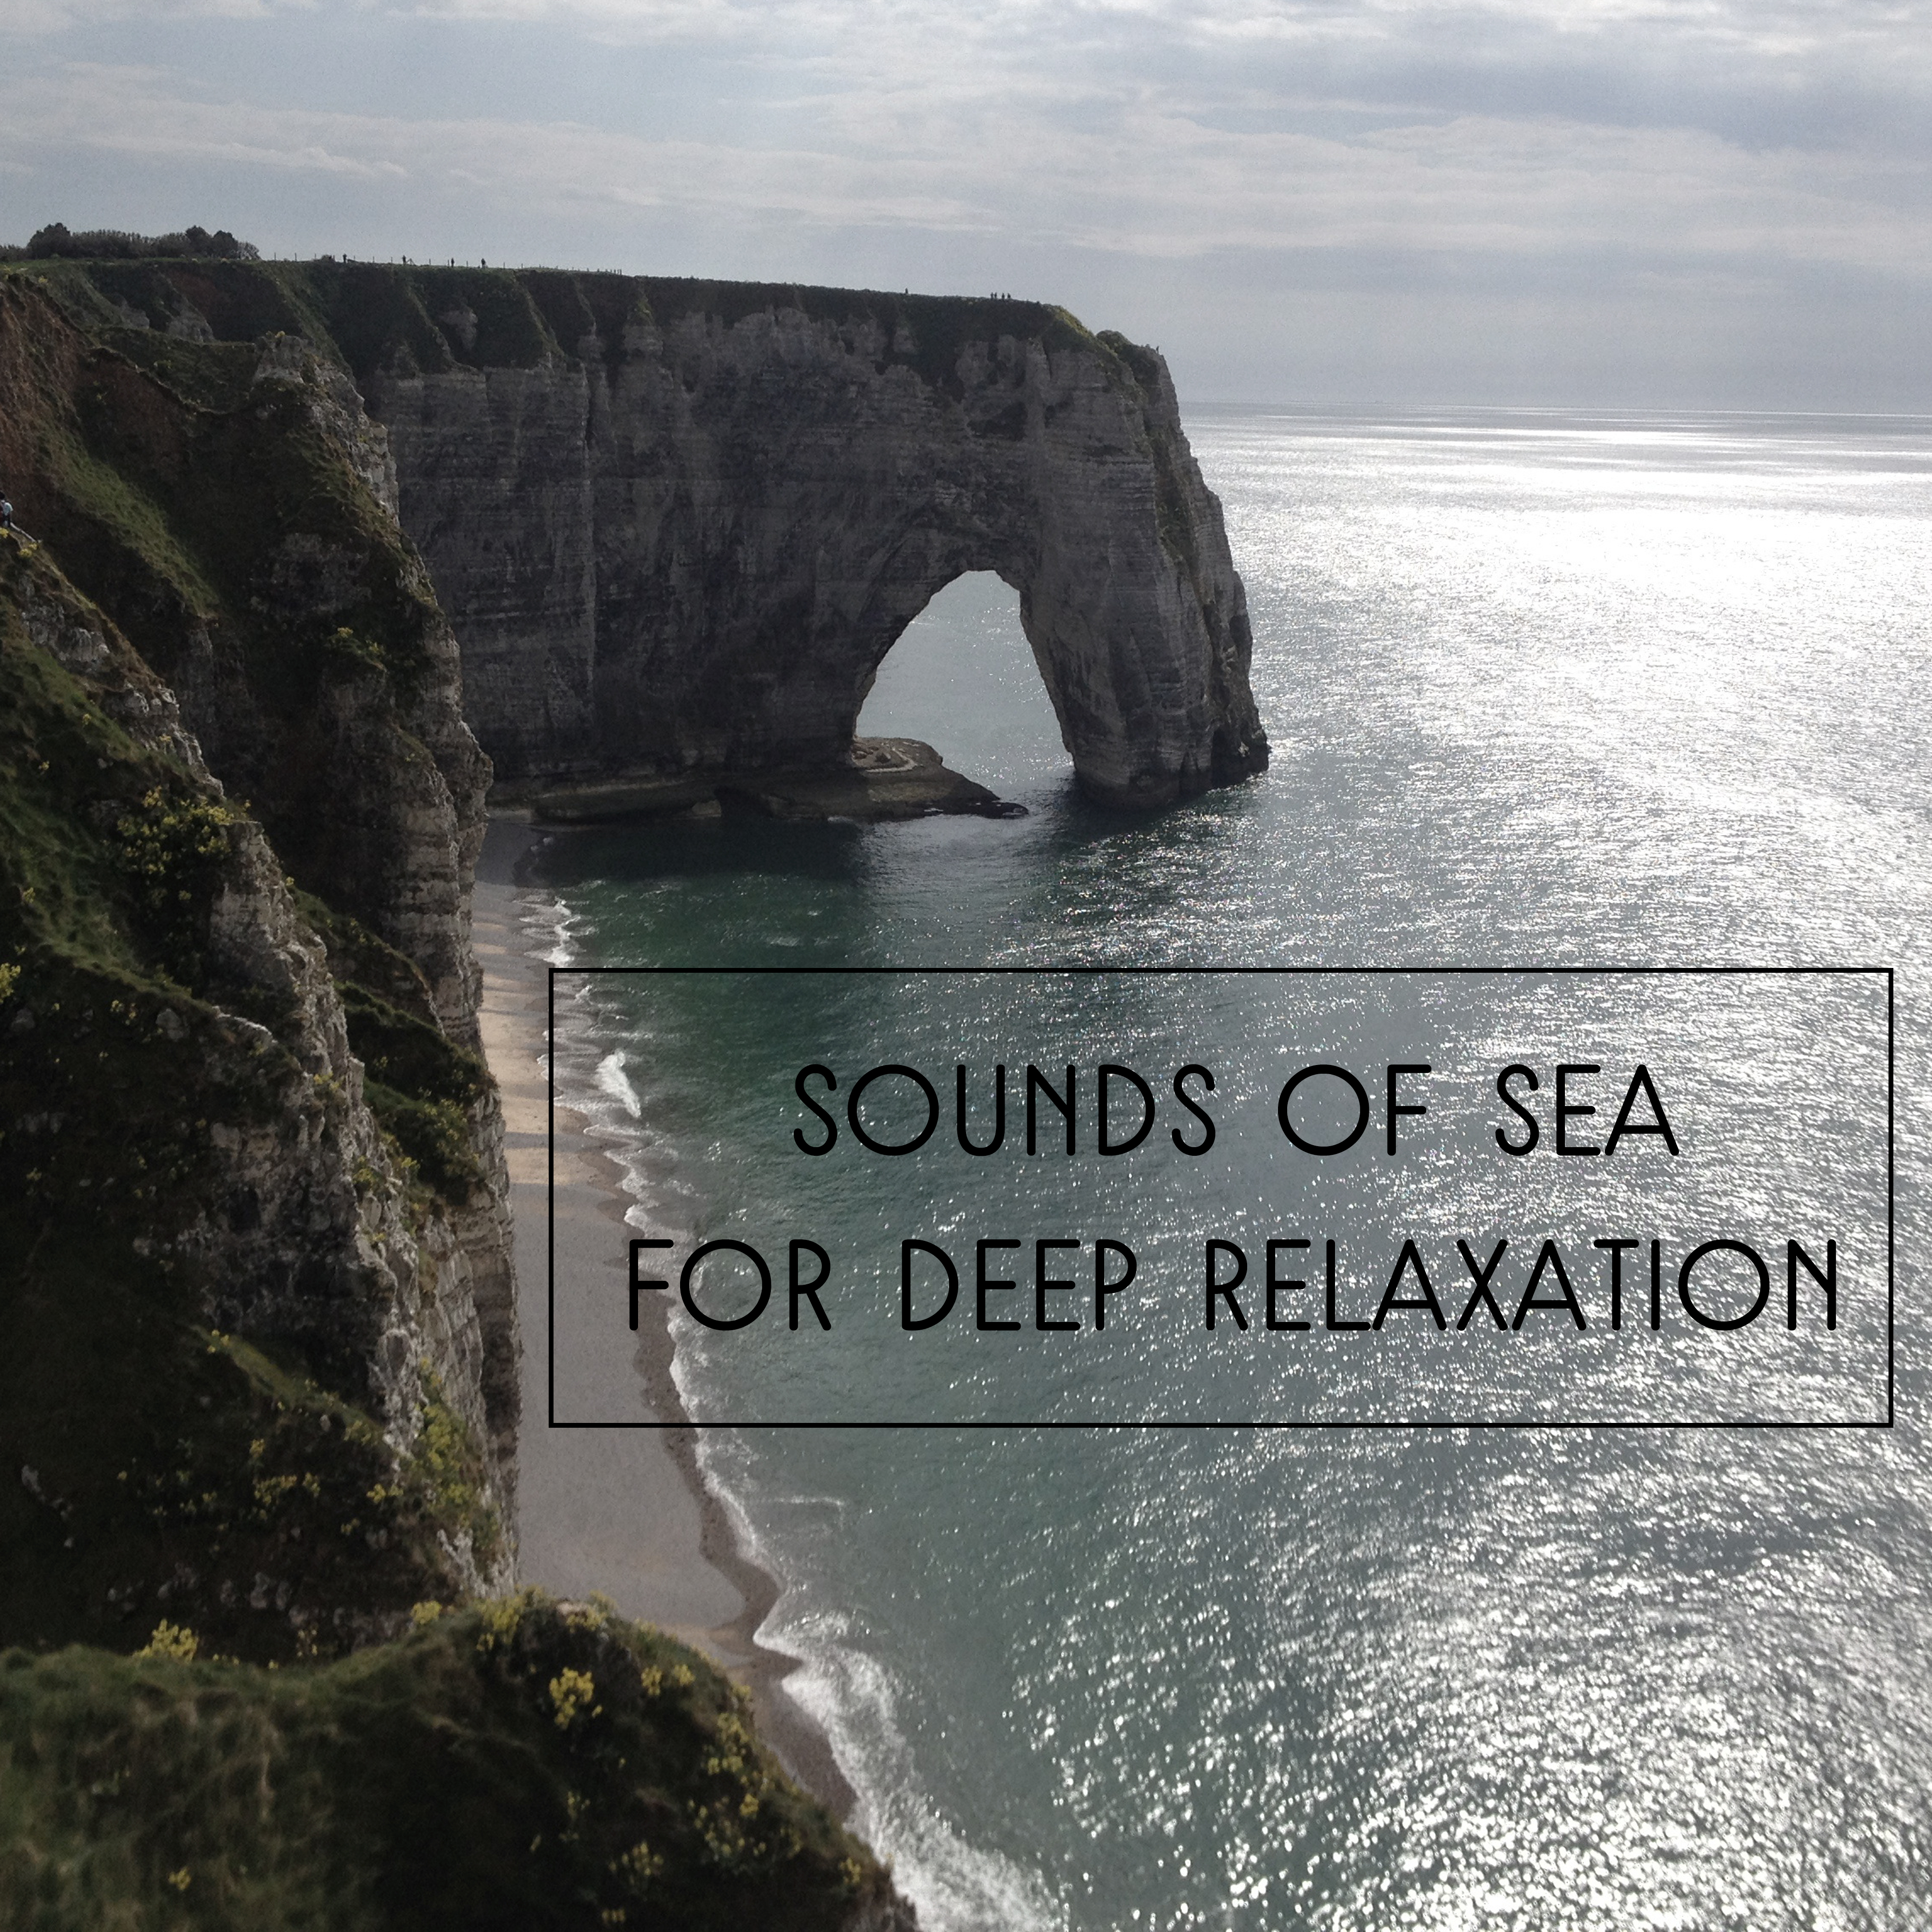 Sounds of Sea for Deep Relaxation  Nature Sounds for Rest, Relaxing Waves, Peaceful Mind, Water Sounds, Stress Relief